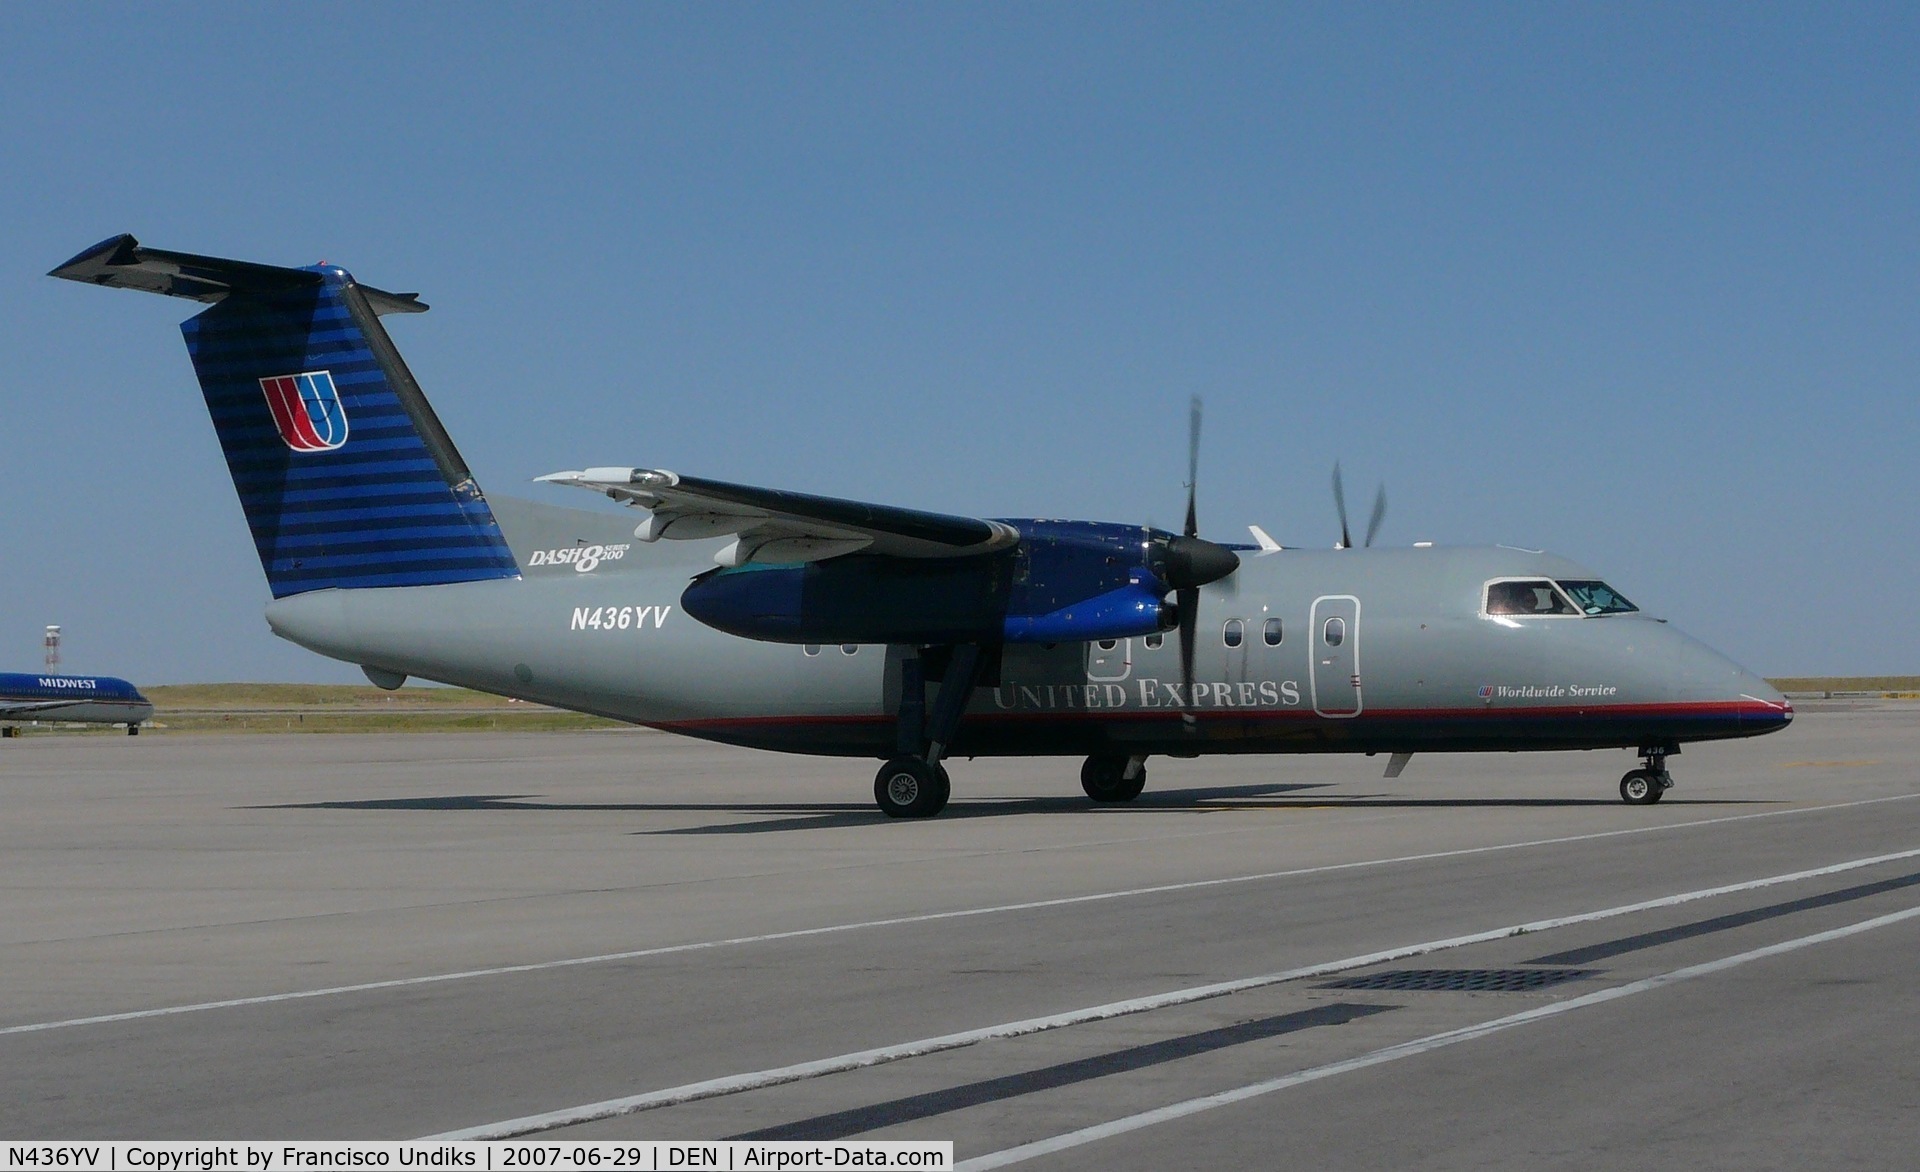 N436YV, 1996 De Havilland Canada DHC-8-202 Dash 8 C/N 436, Waiting for clearance for taxi.